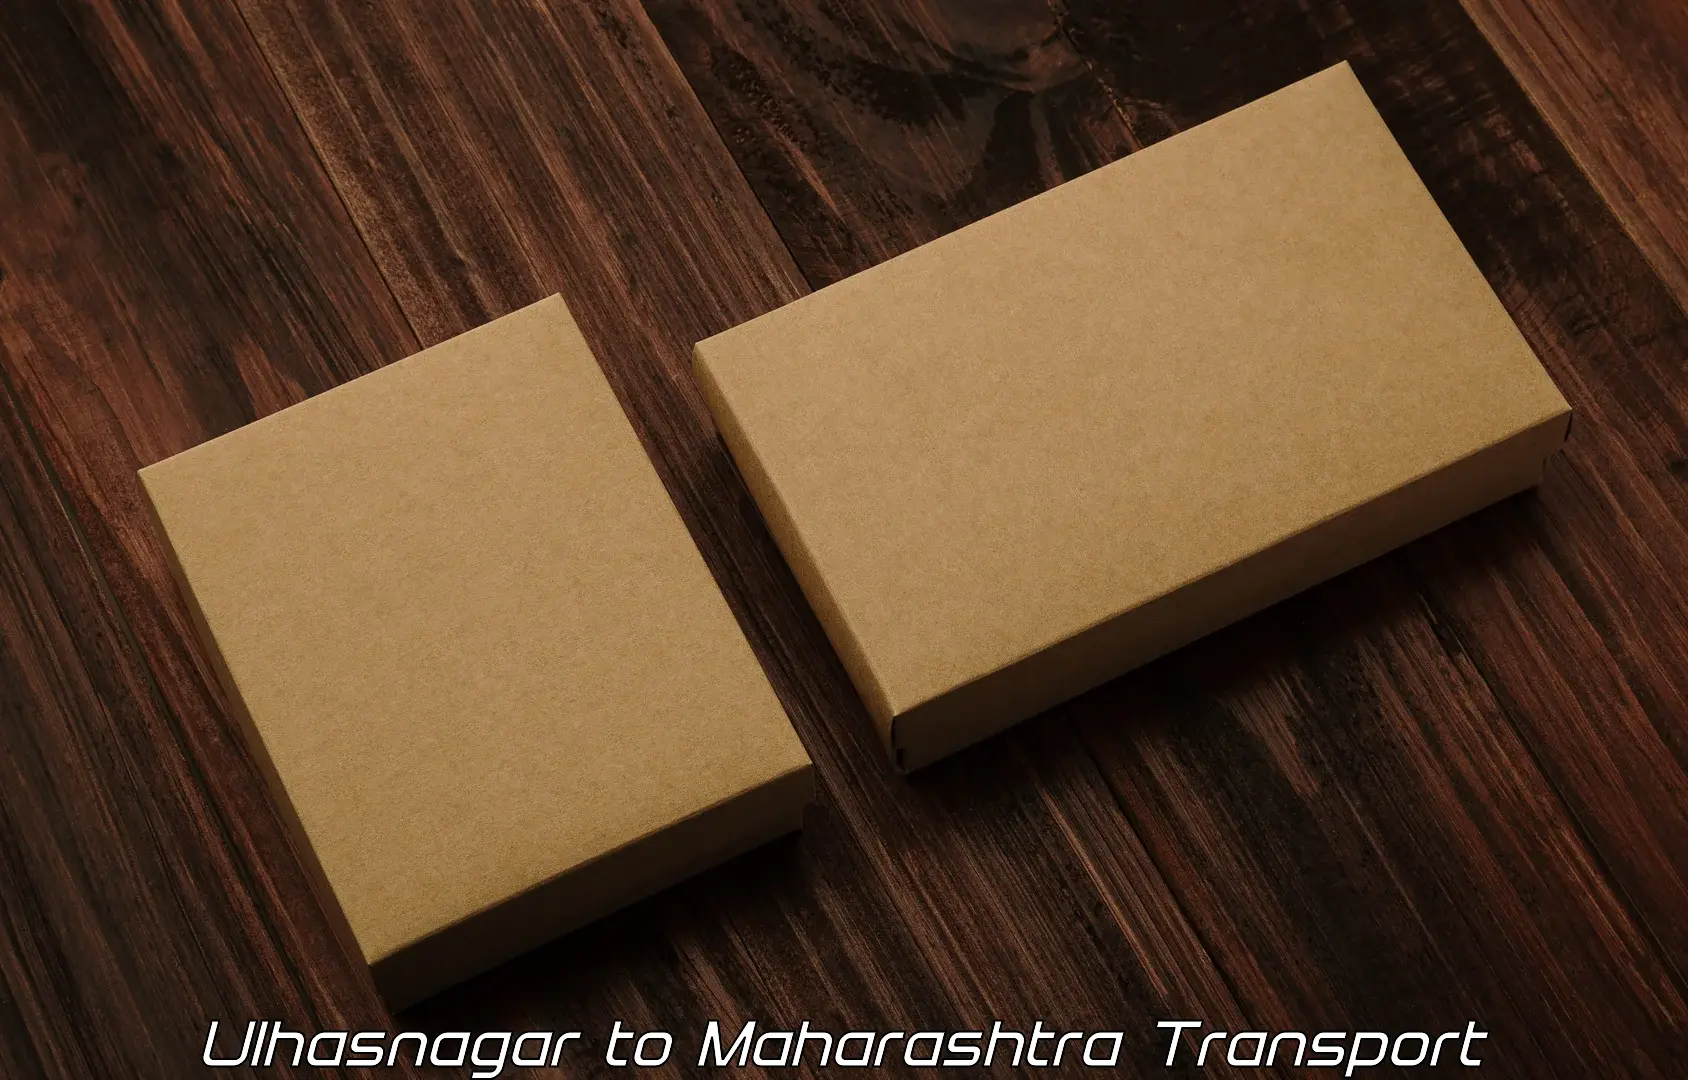 Transport bike from one state to another Ulhasnagar to Andheri